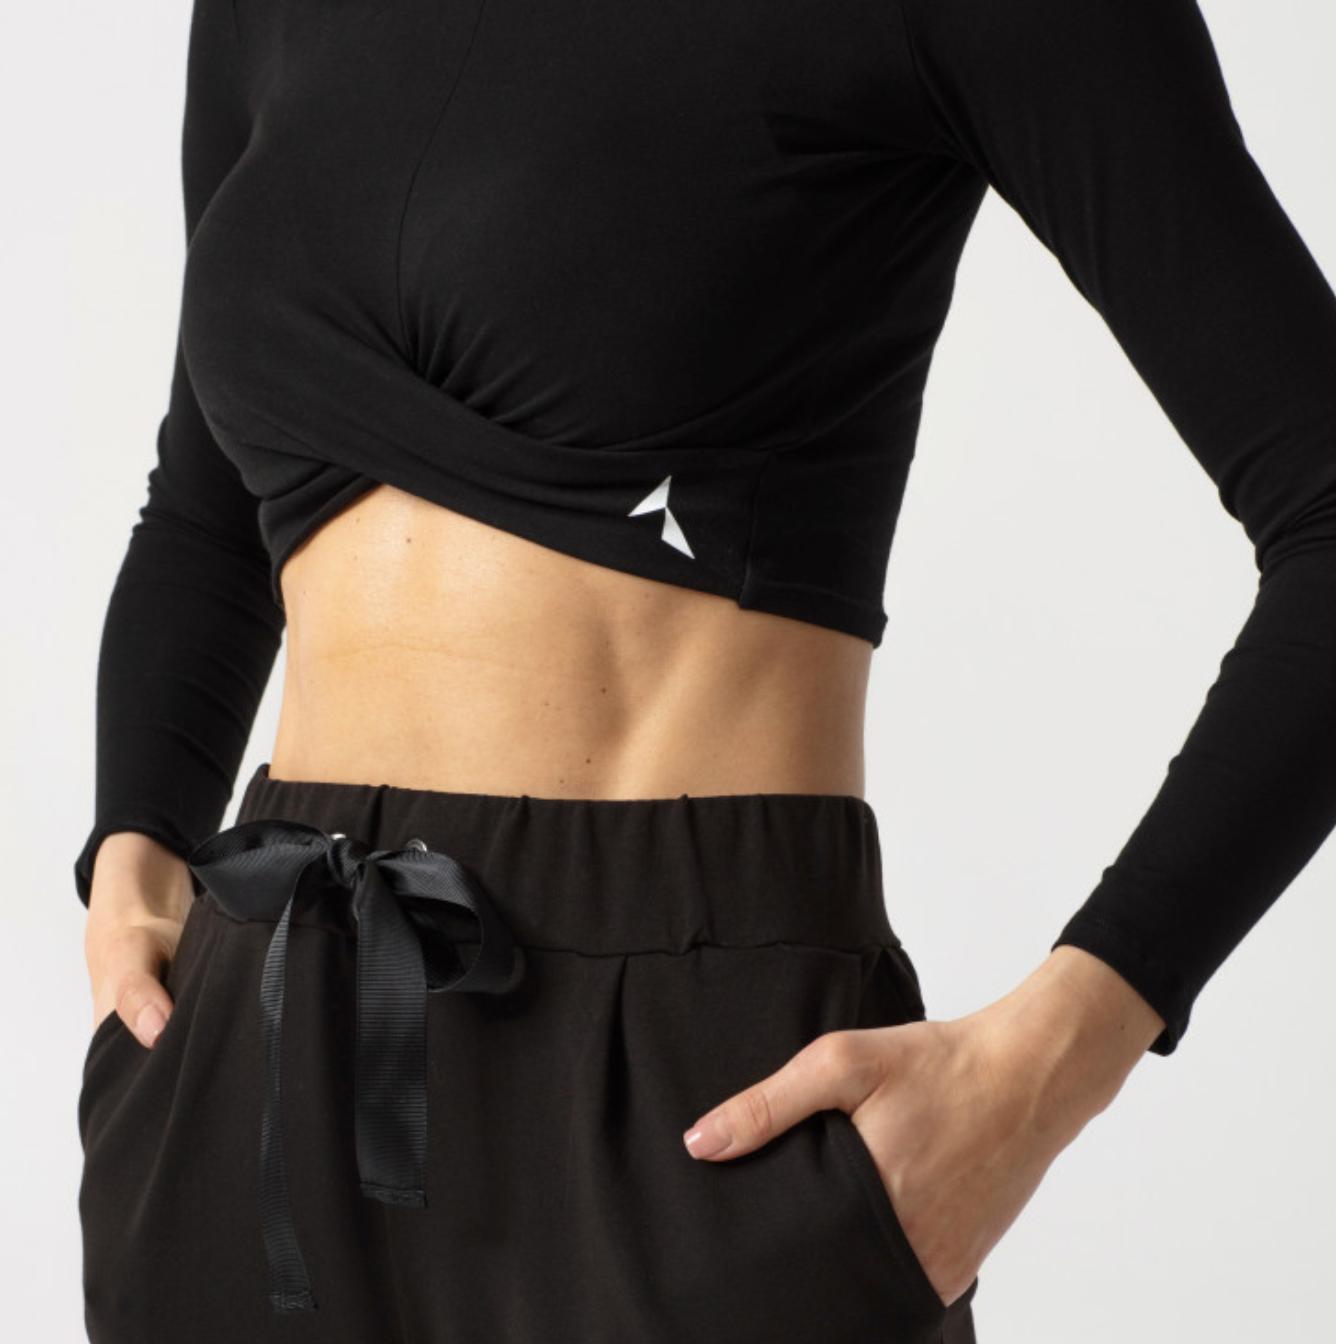 Carpatree Gaia Longsleeve Top - Black cropped long sleeve sports top with twist detail. Made of soft cotton.